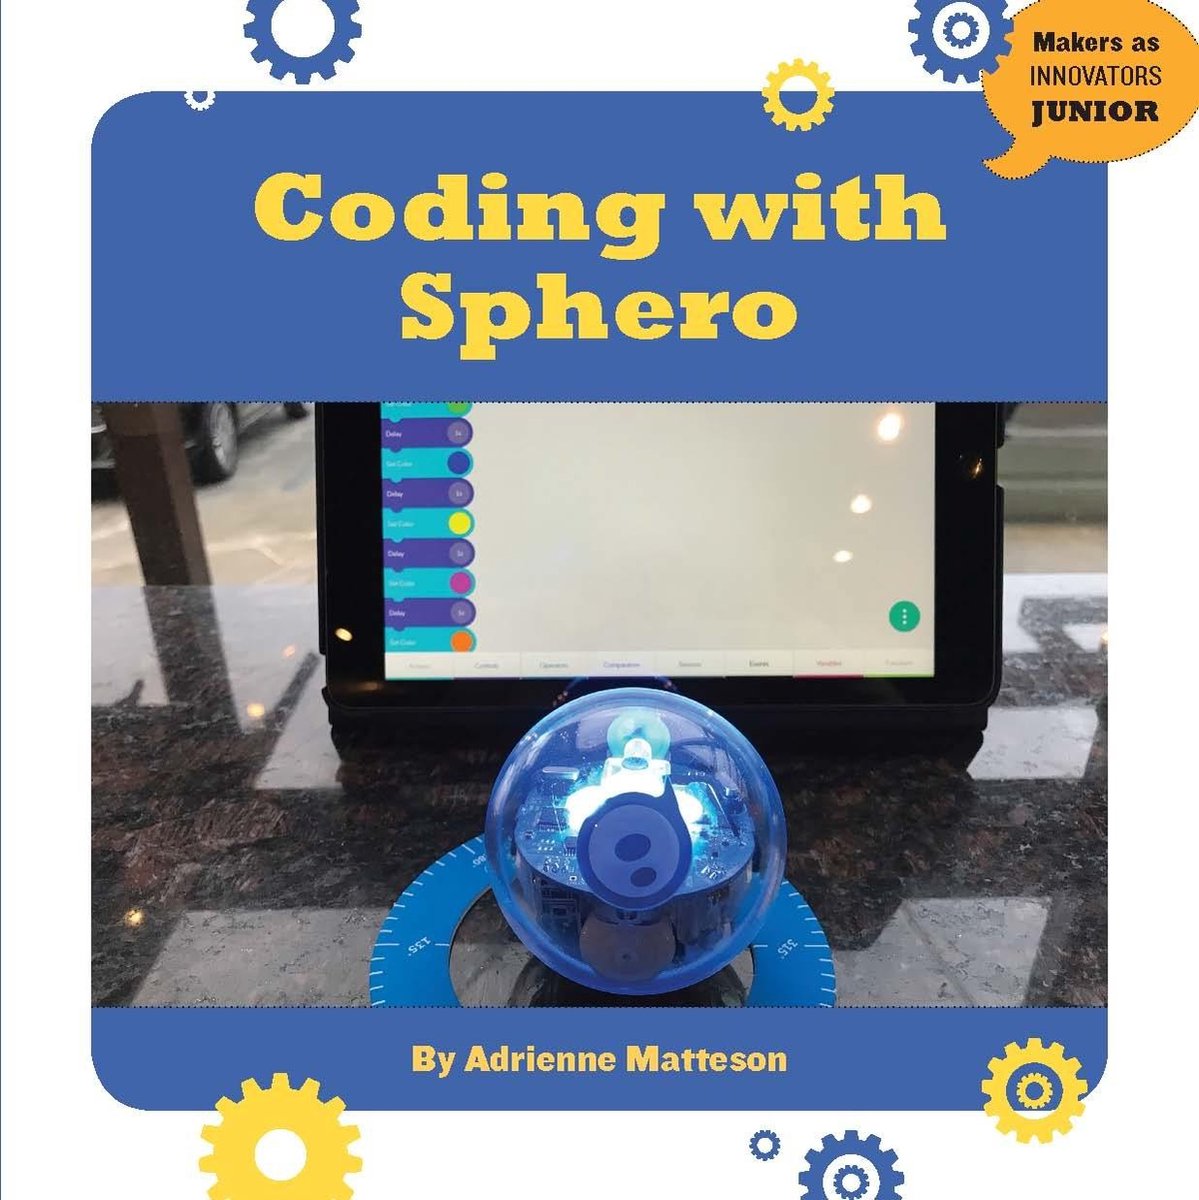 21st Century Skills Innovation Library: Makers as Innovators Junior - Coding with Sphero - Adrienne Matteson